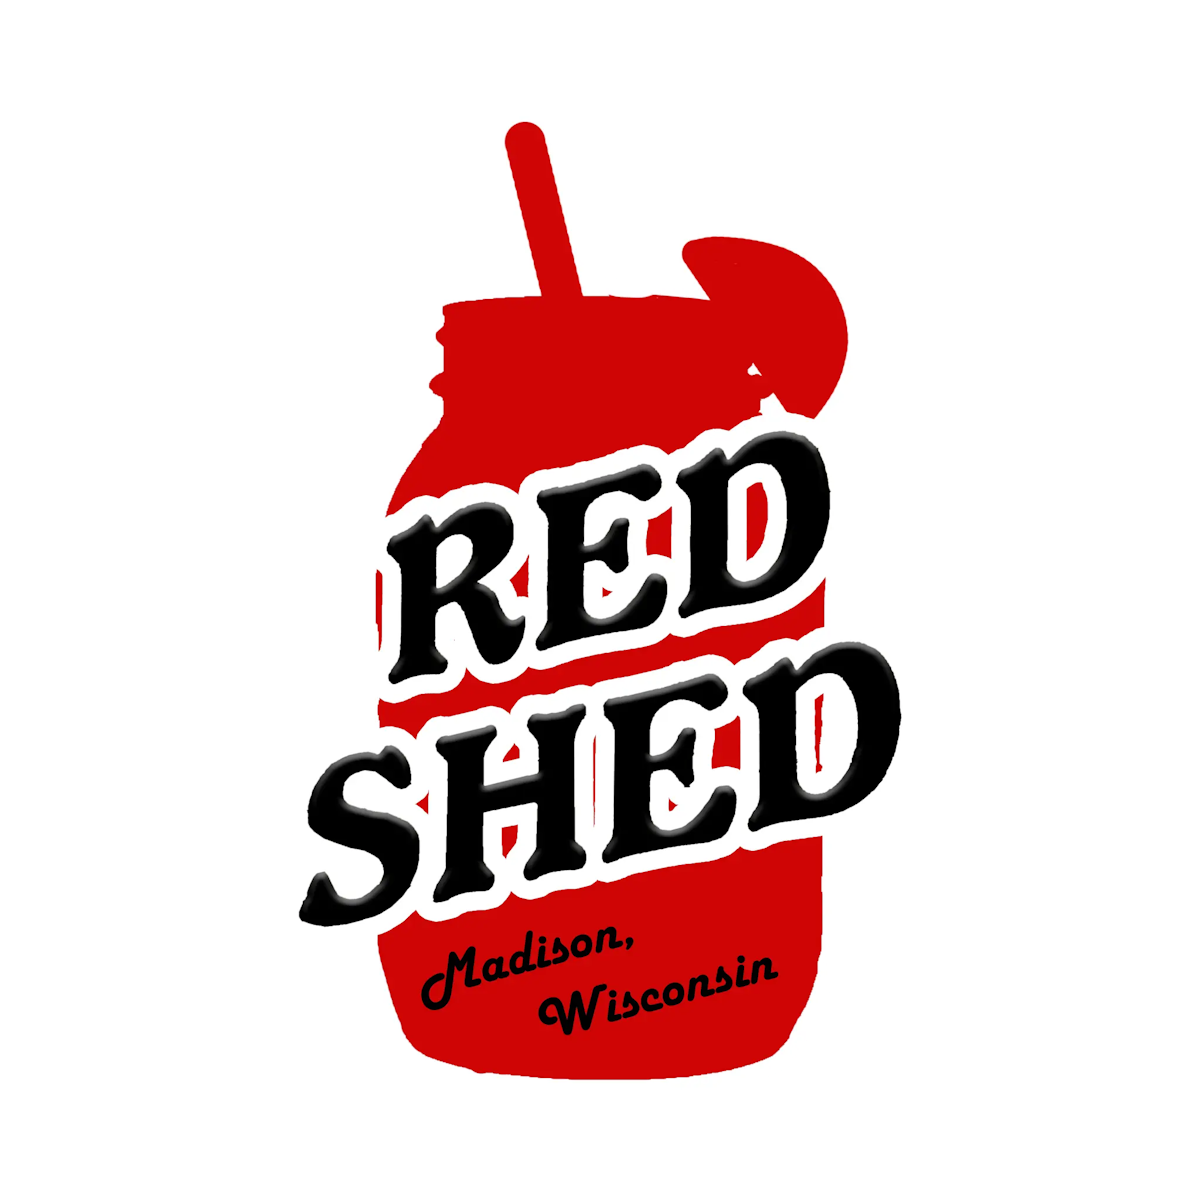 The Red Shed logo